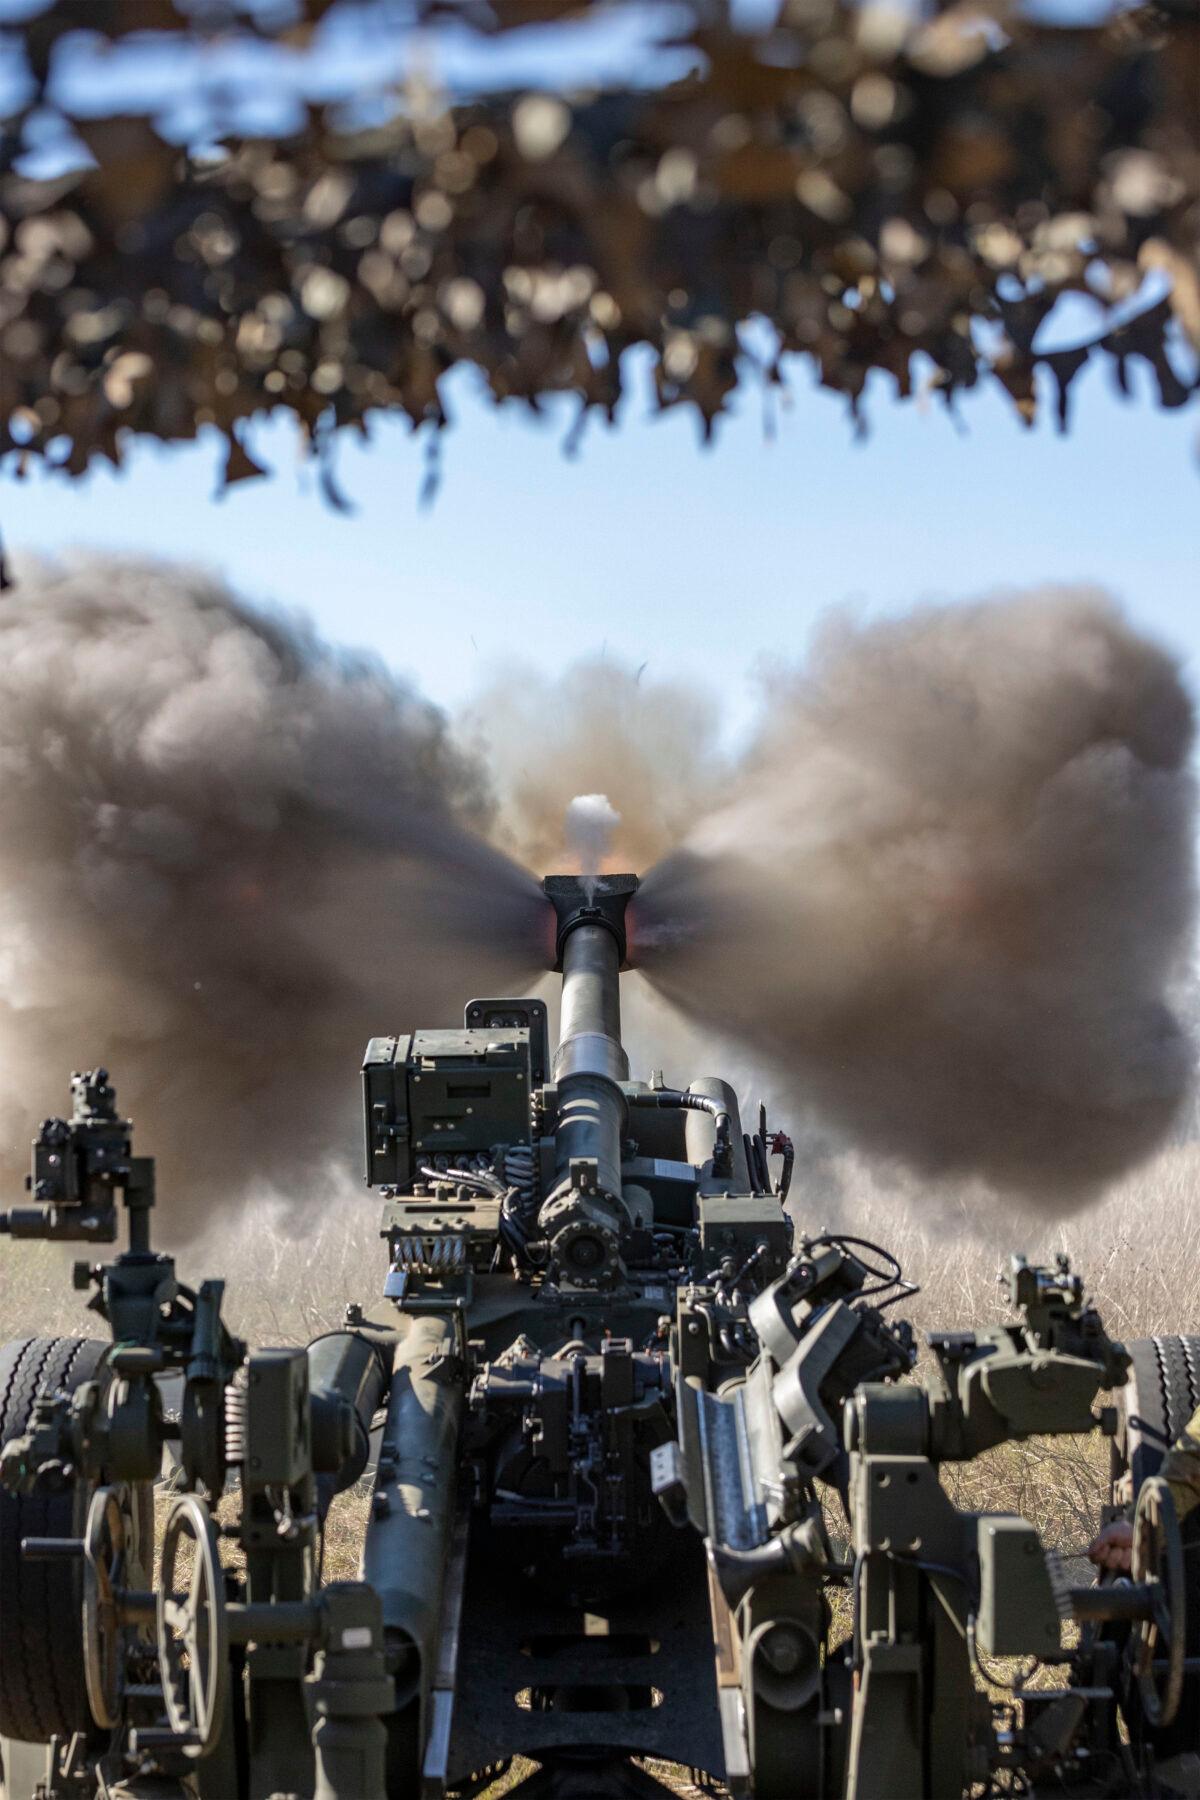 An Australian Army M777 Howitzer fires at Shoalwater Bay Training Area in Queensland during Exercise Talisman Sabre 2021. (Supplied: Australian Department of Defence)